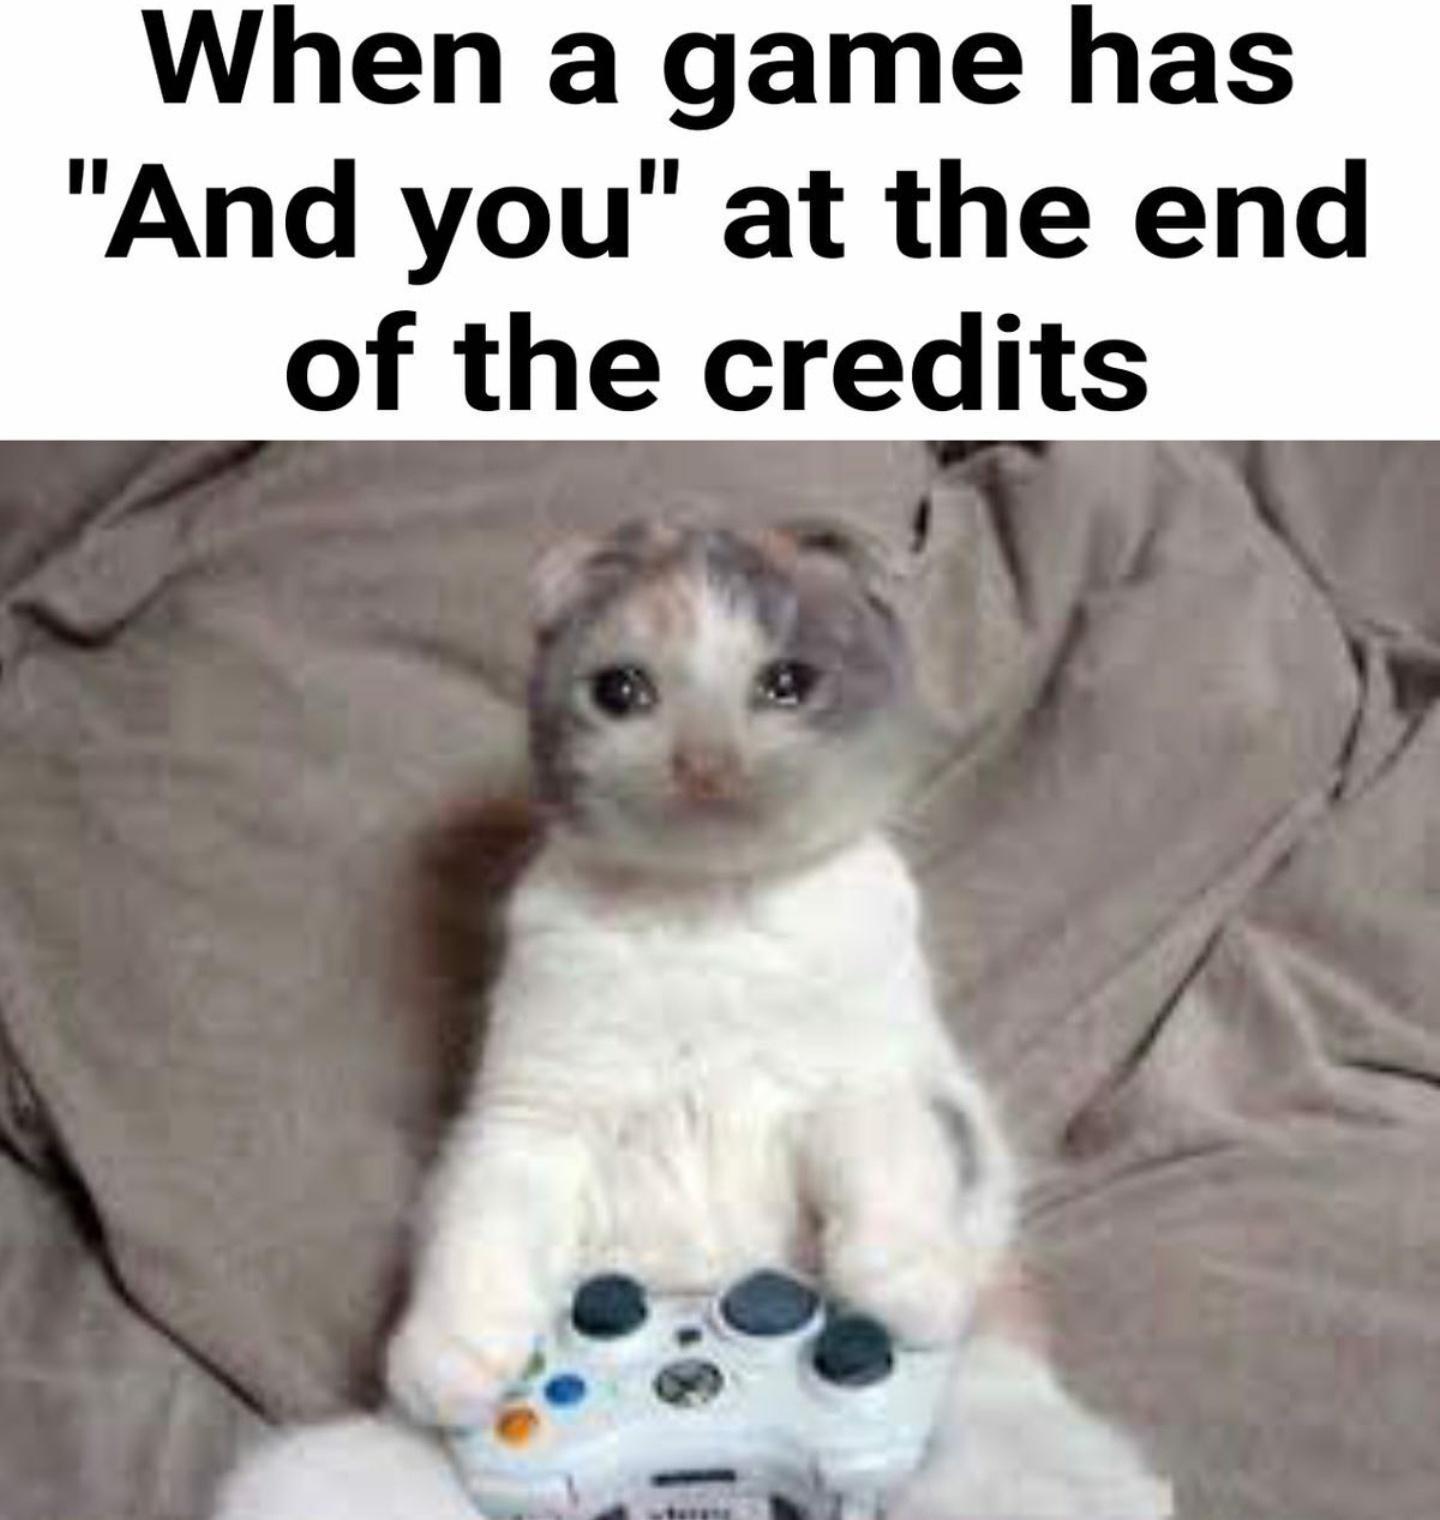 fresh memes - end credits have and you - When a game has "And you" at the end of the credits tavana